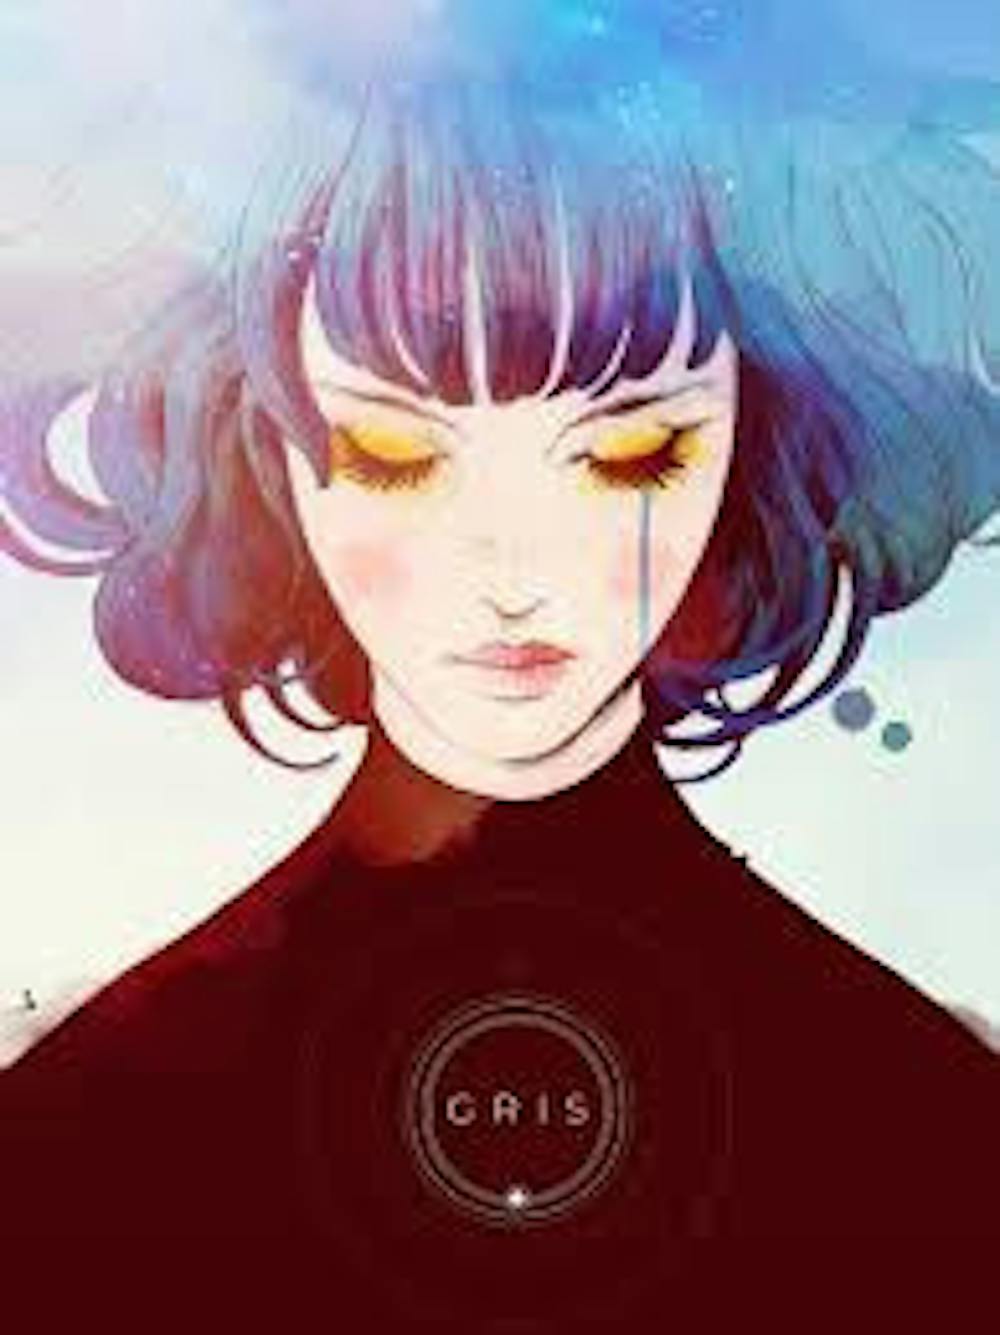 <p>Gris, our third favorite Indie game of 2018, allows players dive into a world of living illustration.</p>